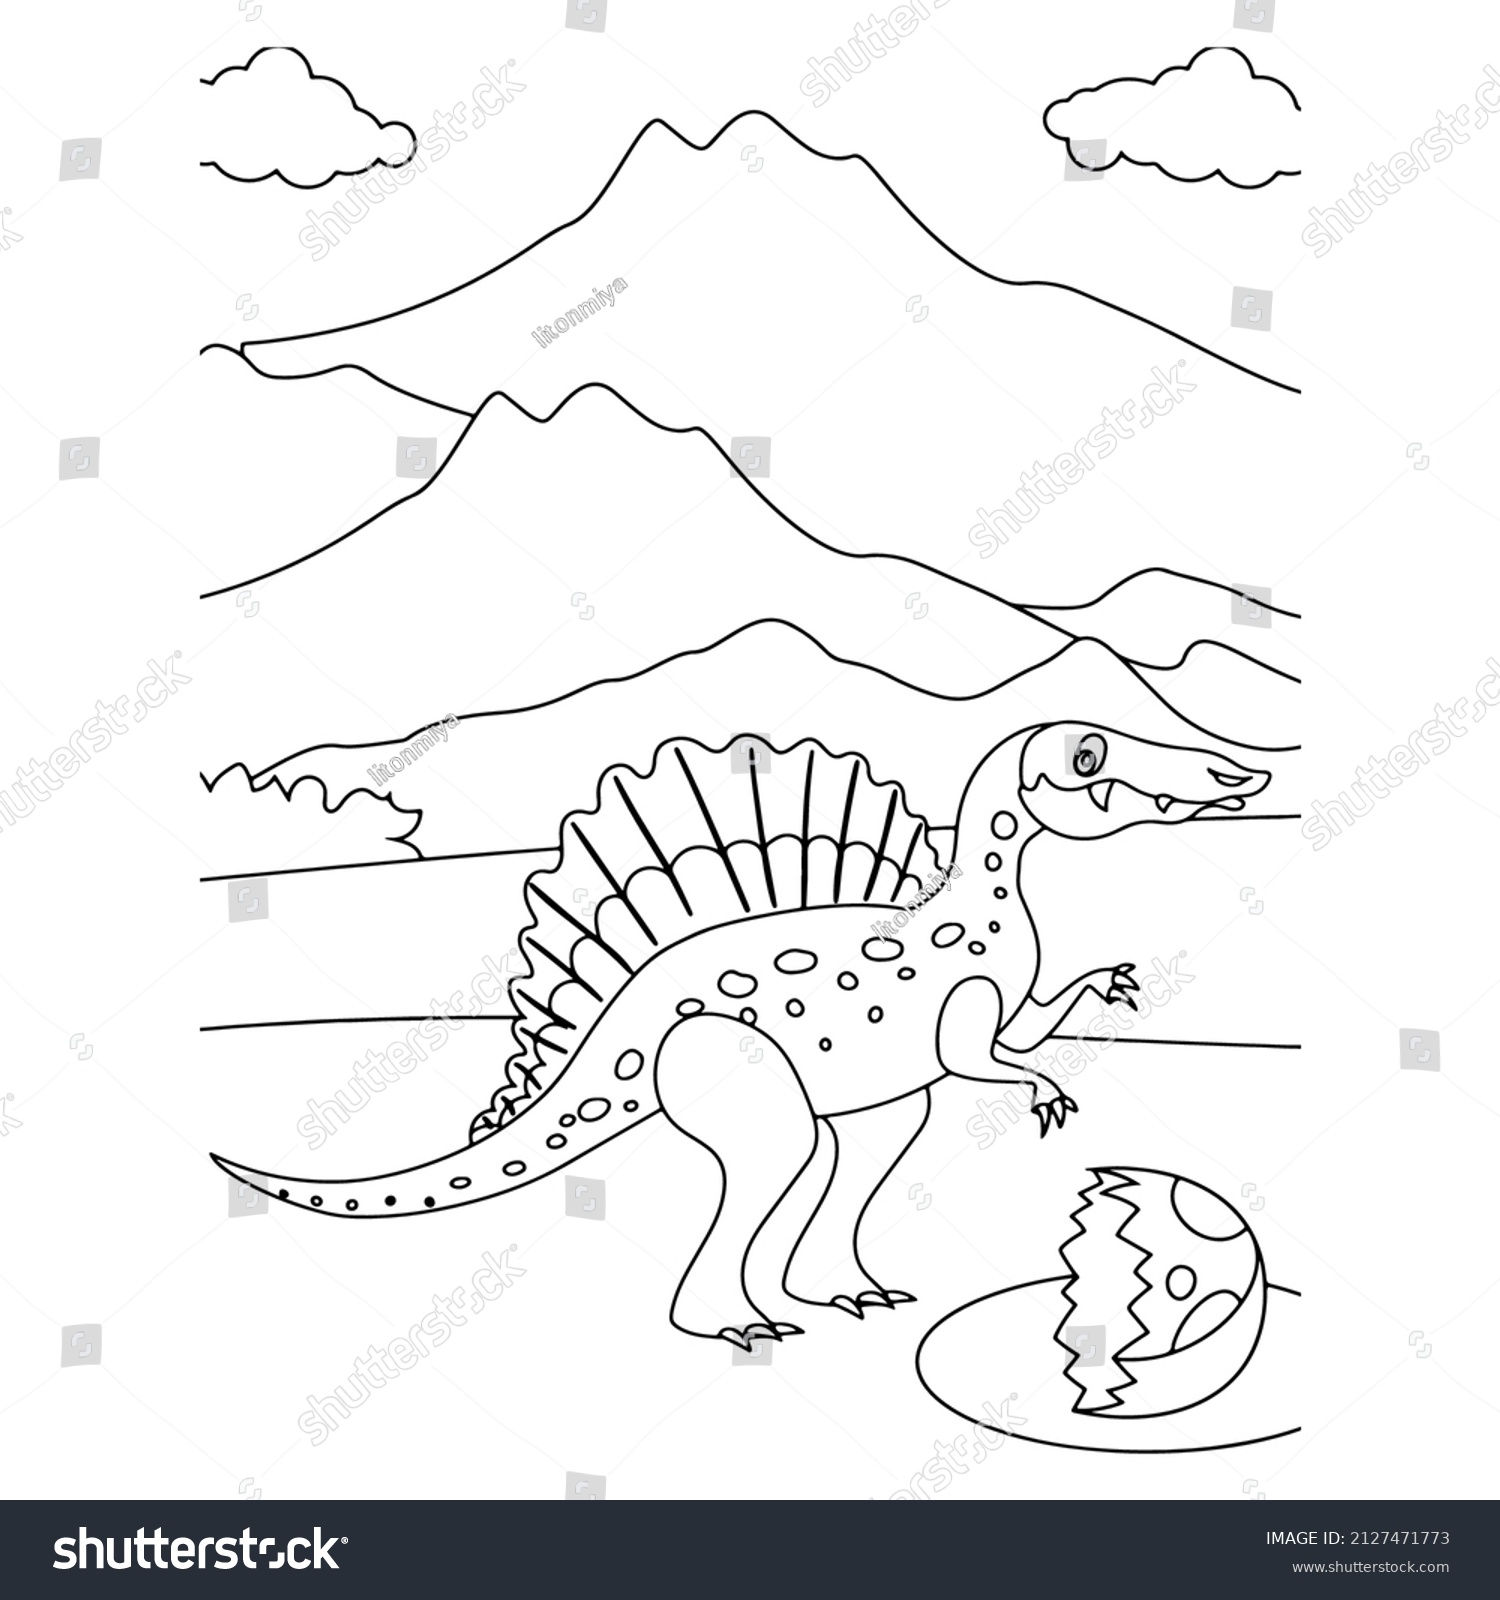 Dinosaur Coloring Pages Kids Stock Vector (Royalty Free) 2127471773